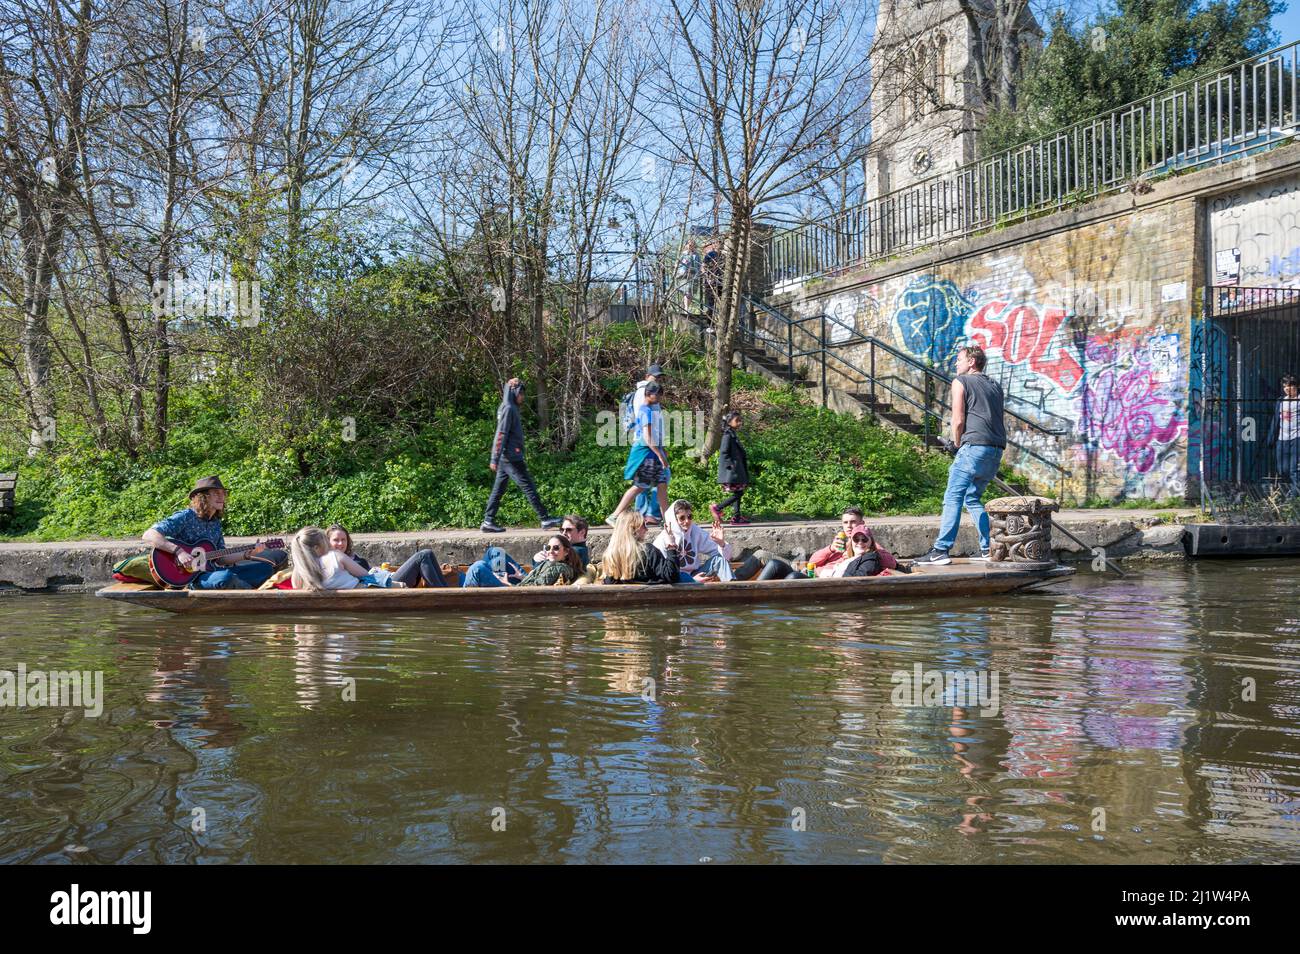 People enjoy a boat ride along the Regents Canal on a traditional punt boat with a live musical performance on board. London, England, UK. Stock Photo